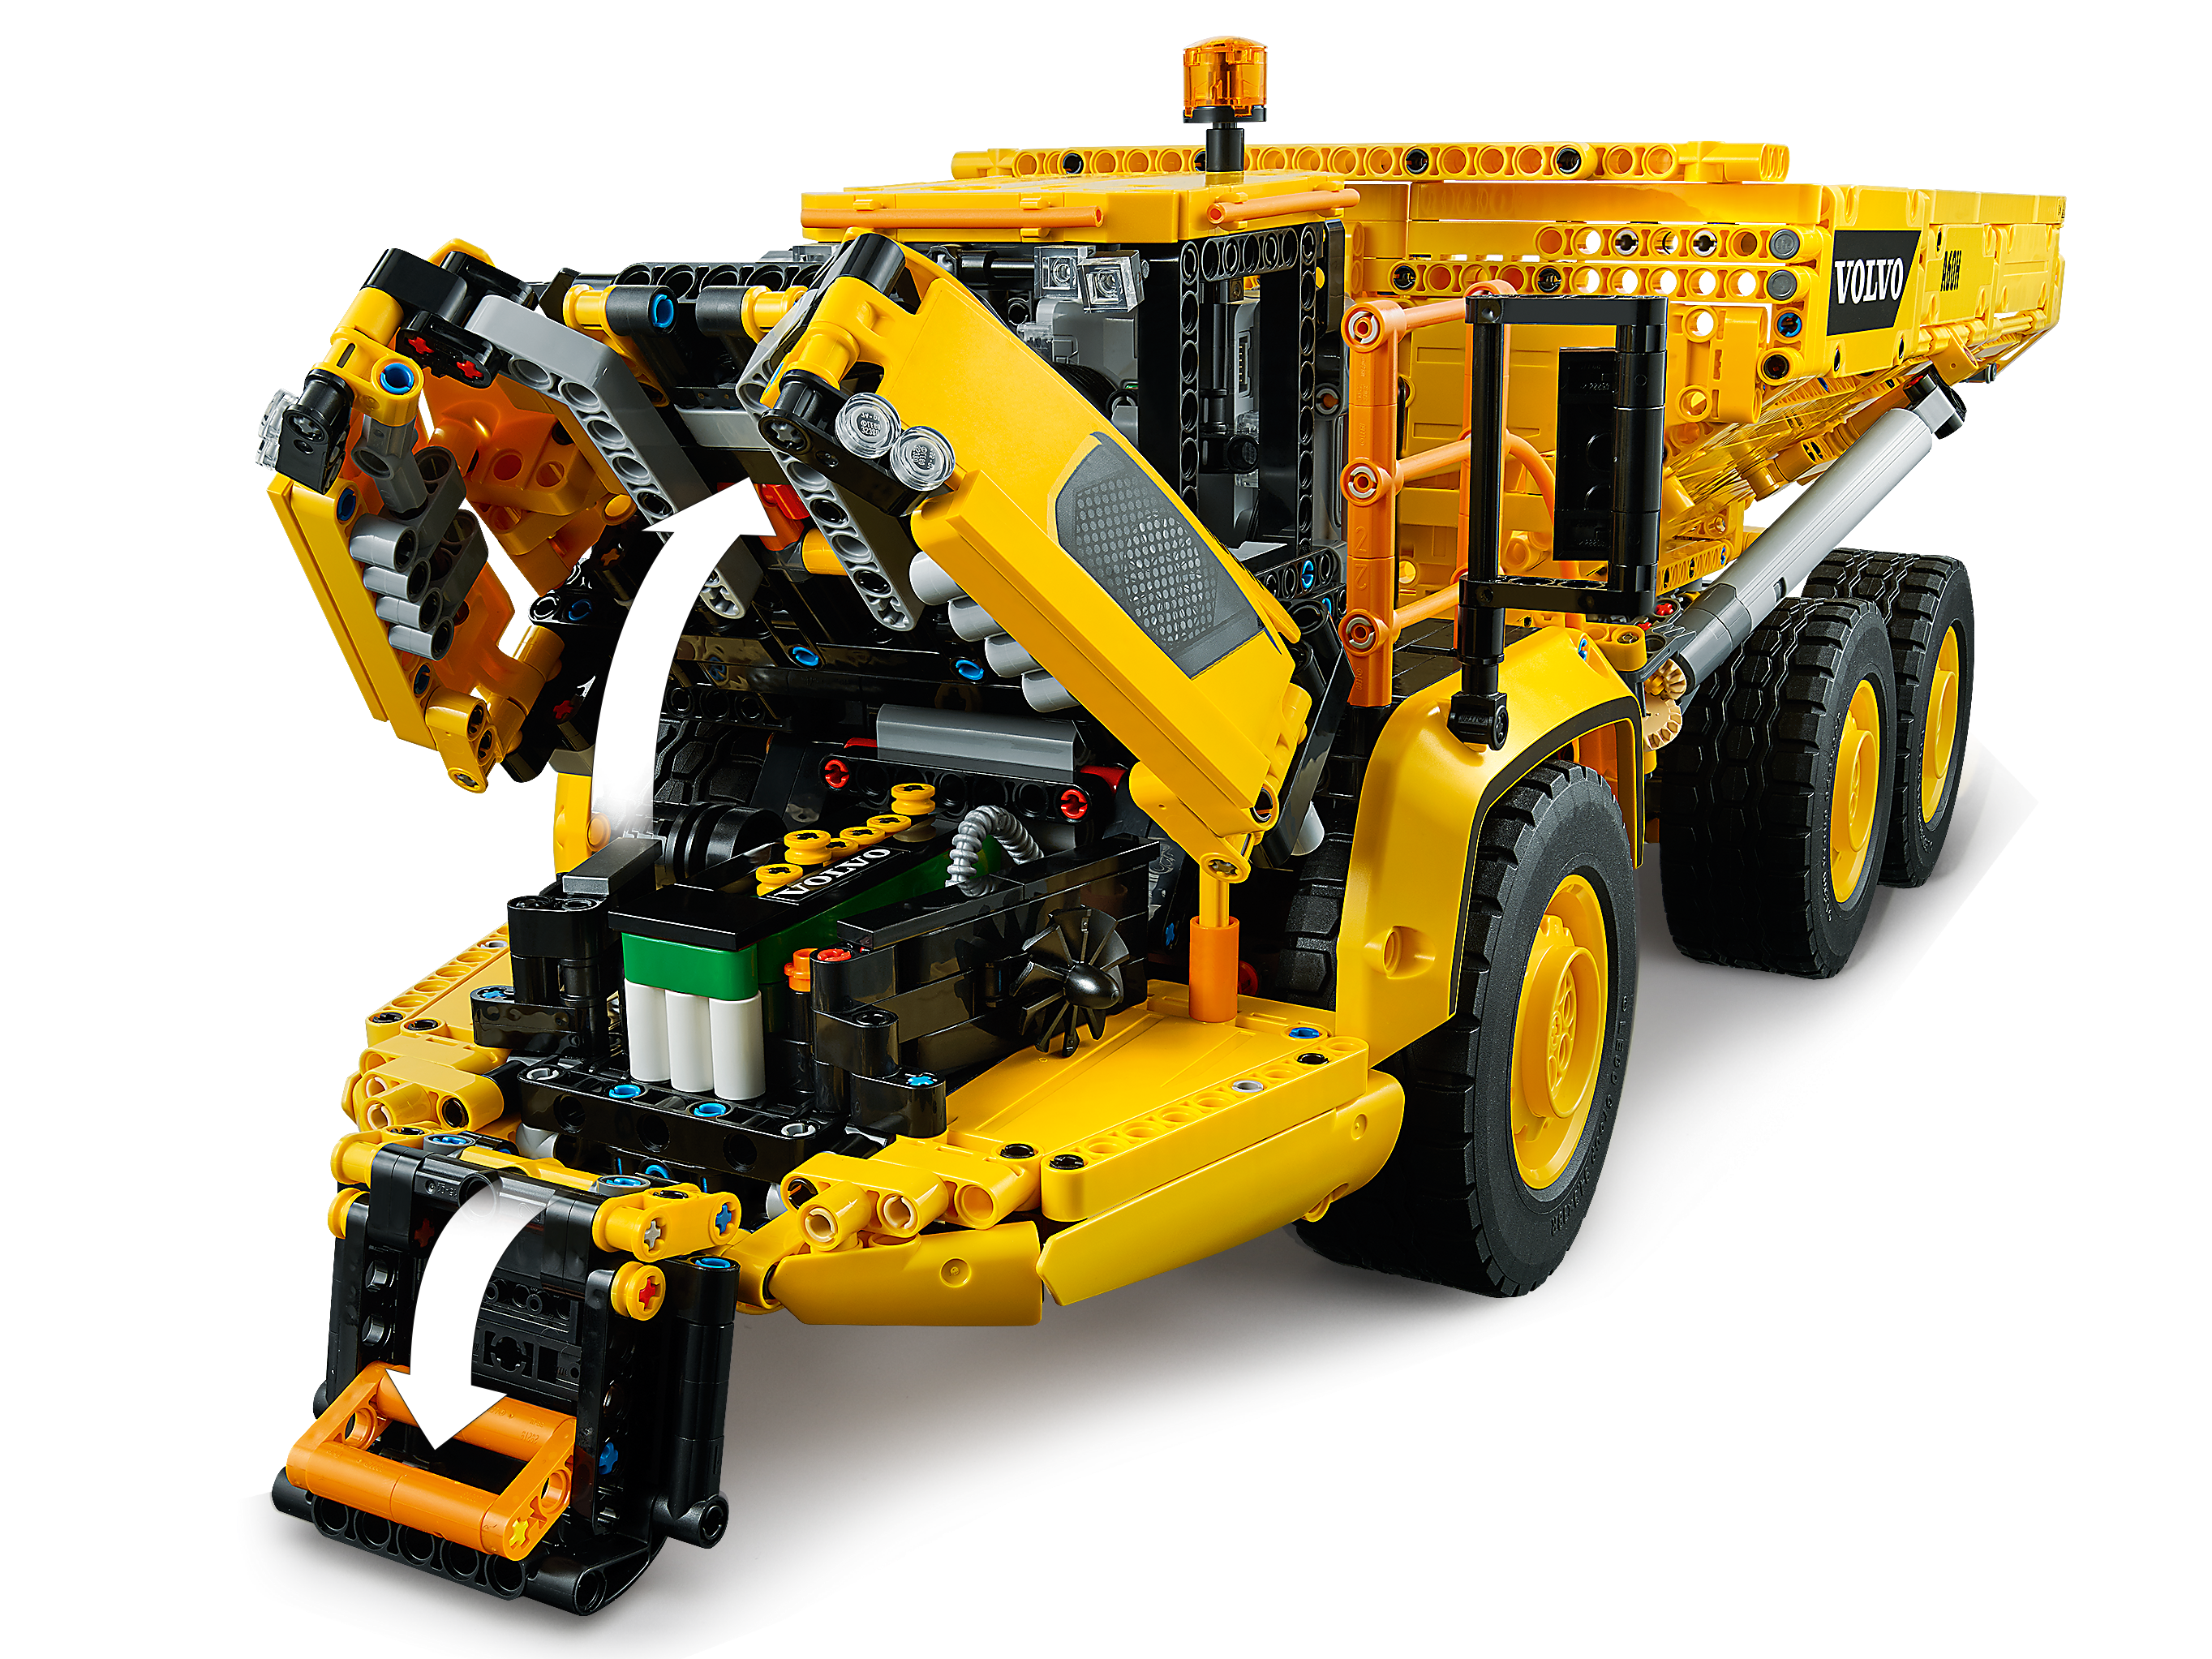 6x6 Volvo Articulated Hauler 42114 | Technic™ | Buy online at the 